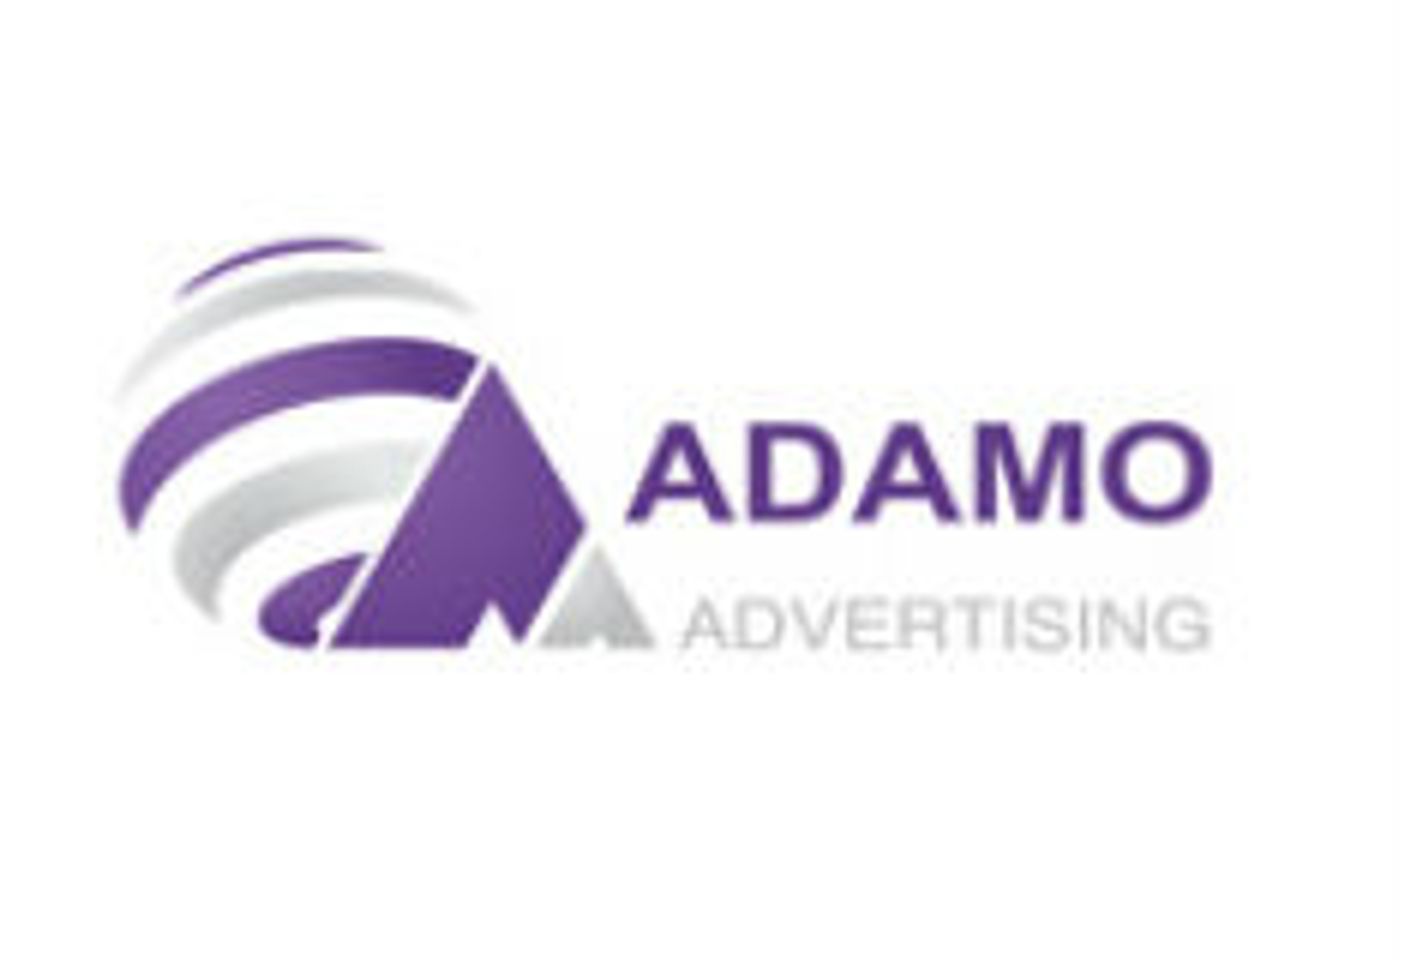 Interstitial Ads, Time Zone Targeting Added To Adamo’s Traffic Network